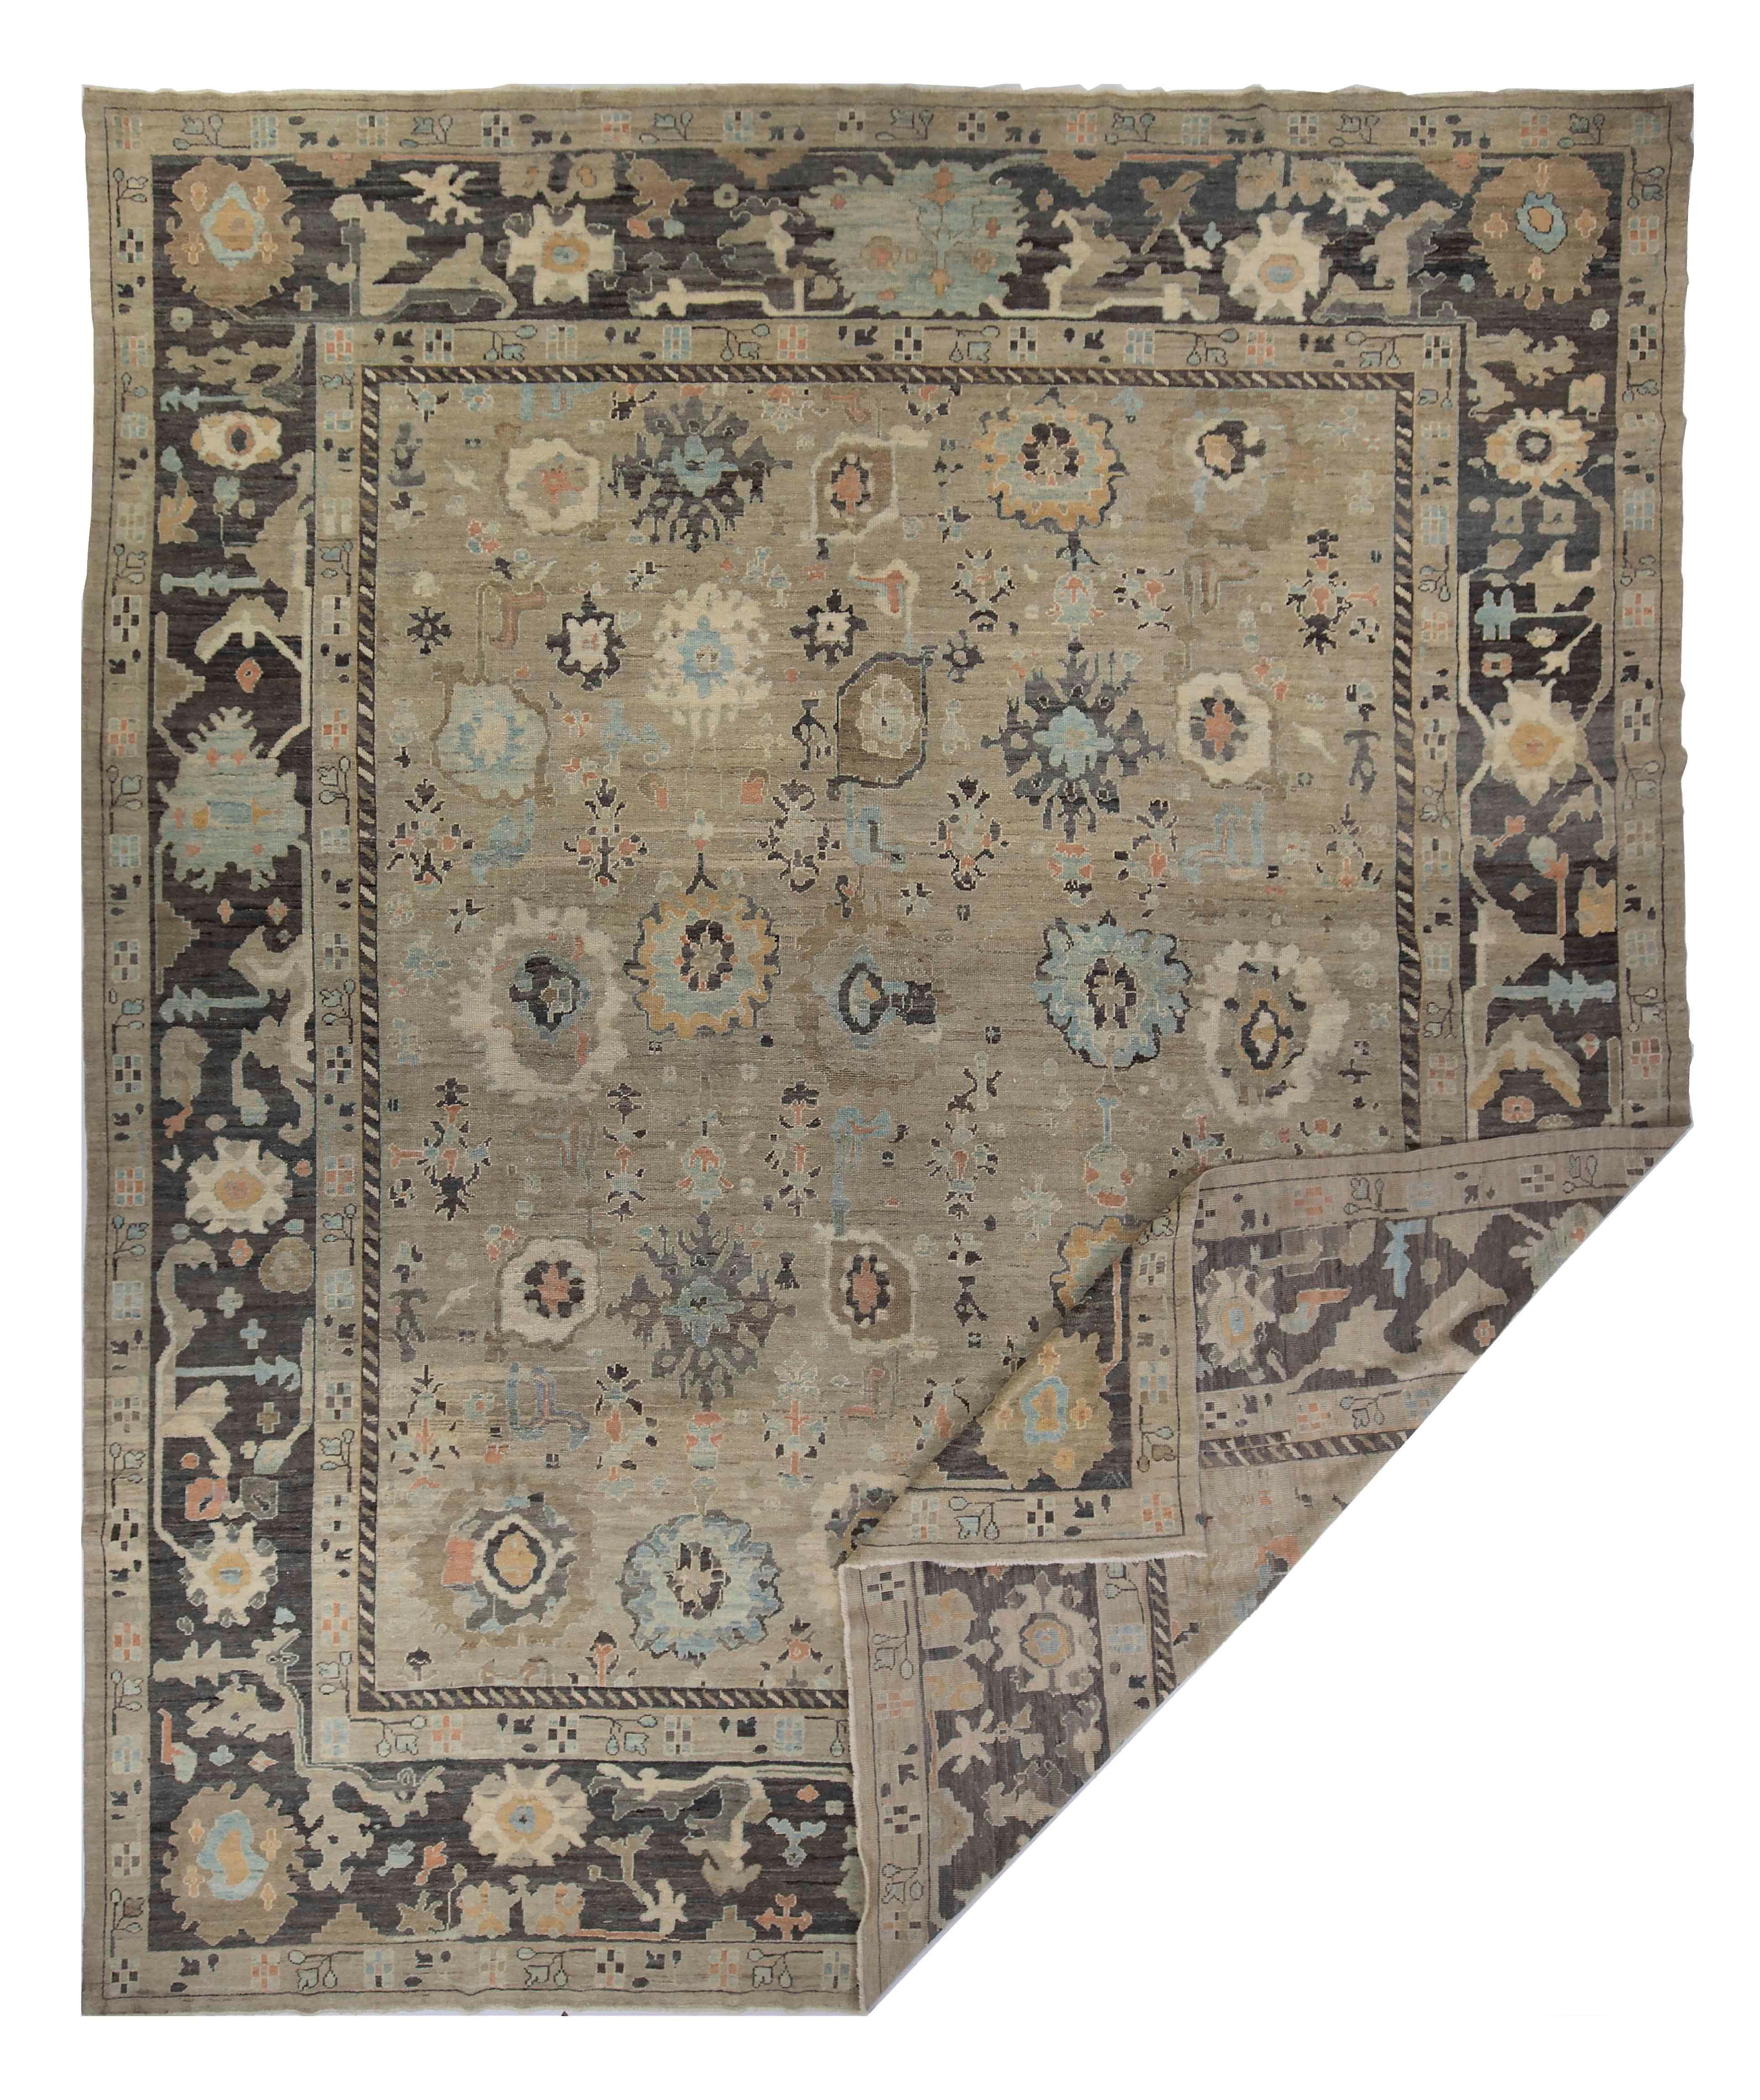 New Turkish rug made of handwoven sheep’s wool of the finest quality. It’s colored with organic vegetable dyes that are certified safe for humans and pets alike. It features floral details in pink and blue over a regal gray field. Flower patterns